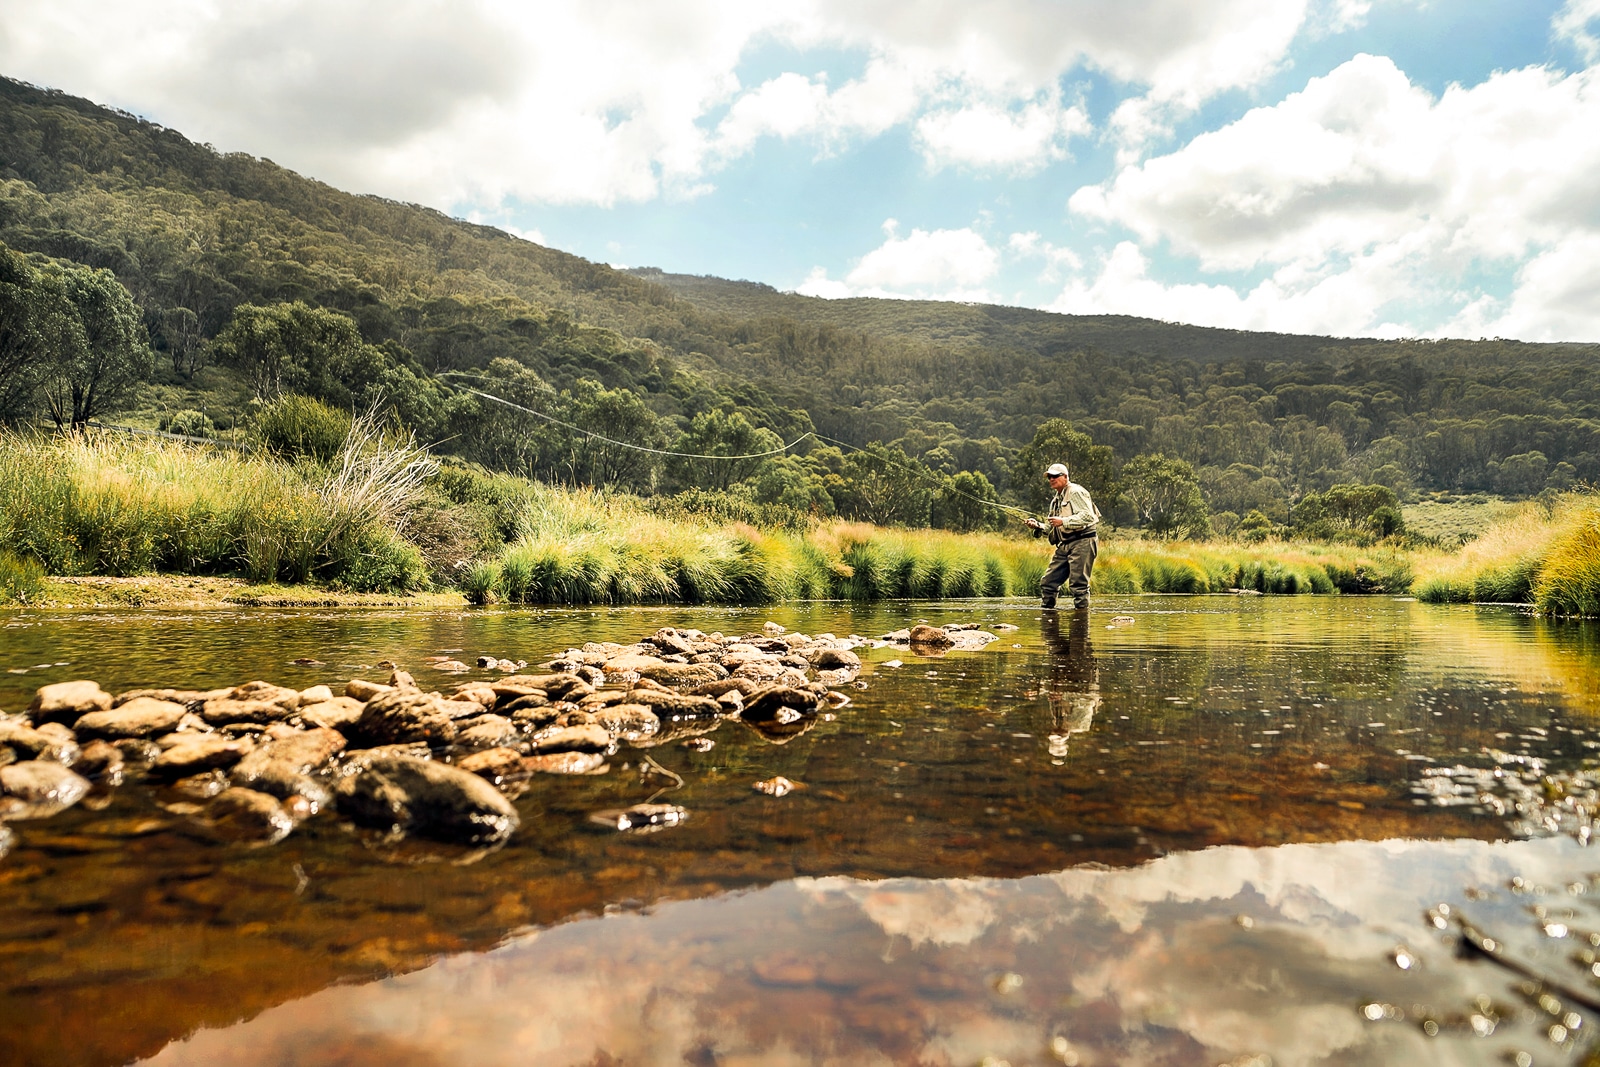 A Weekend Guide To Fly Fishing The Coxs River